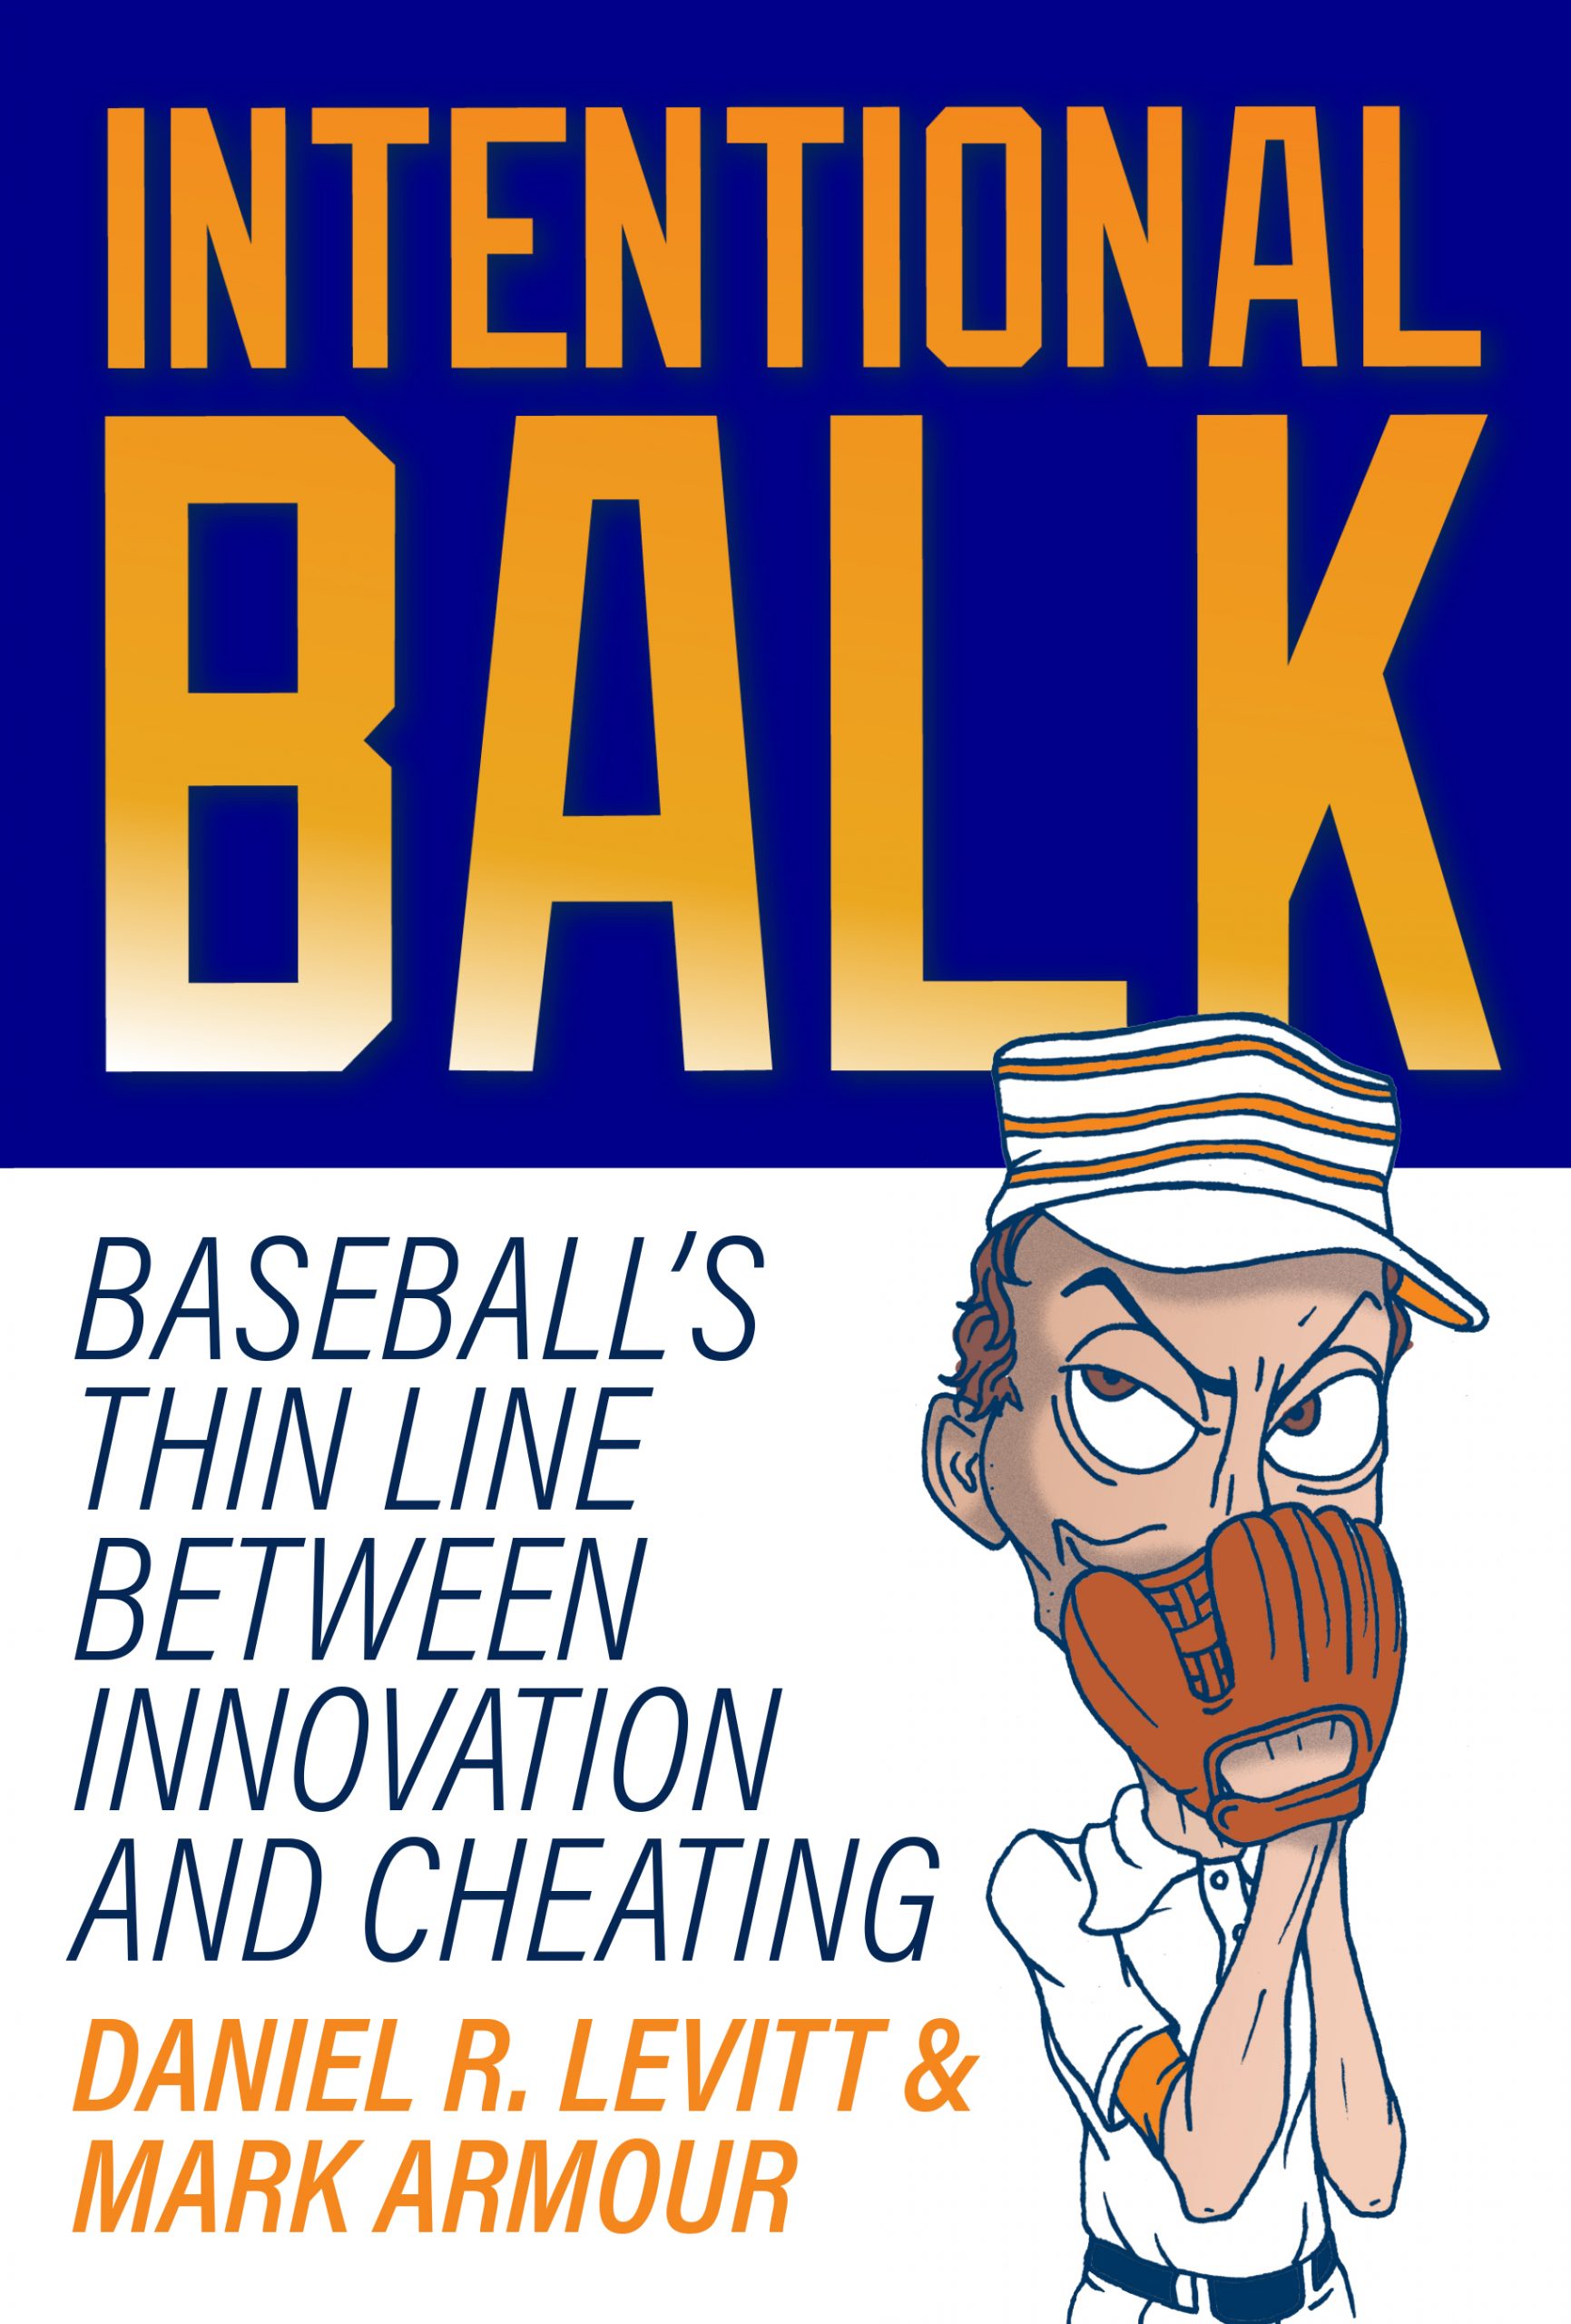 Intentional Balk: Baseball’s Thin Line Between Innovation and Cheating, by Mark Armour and Dan Levitt